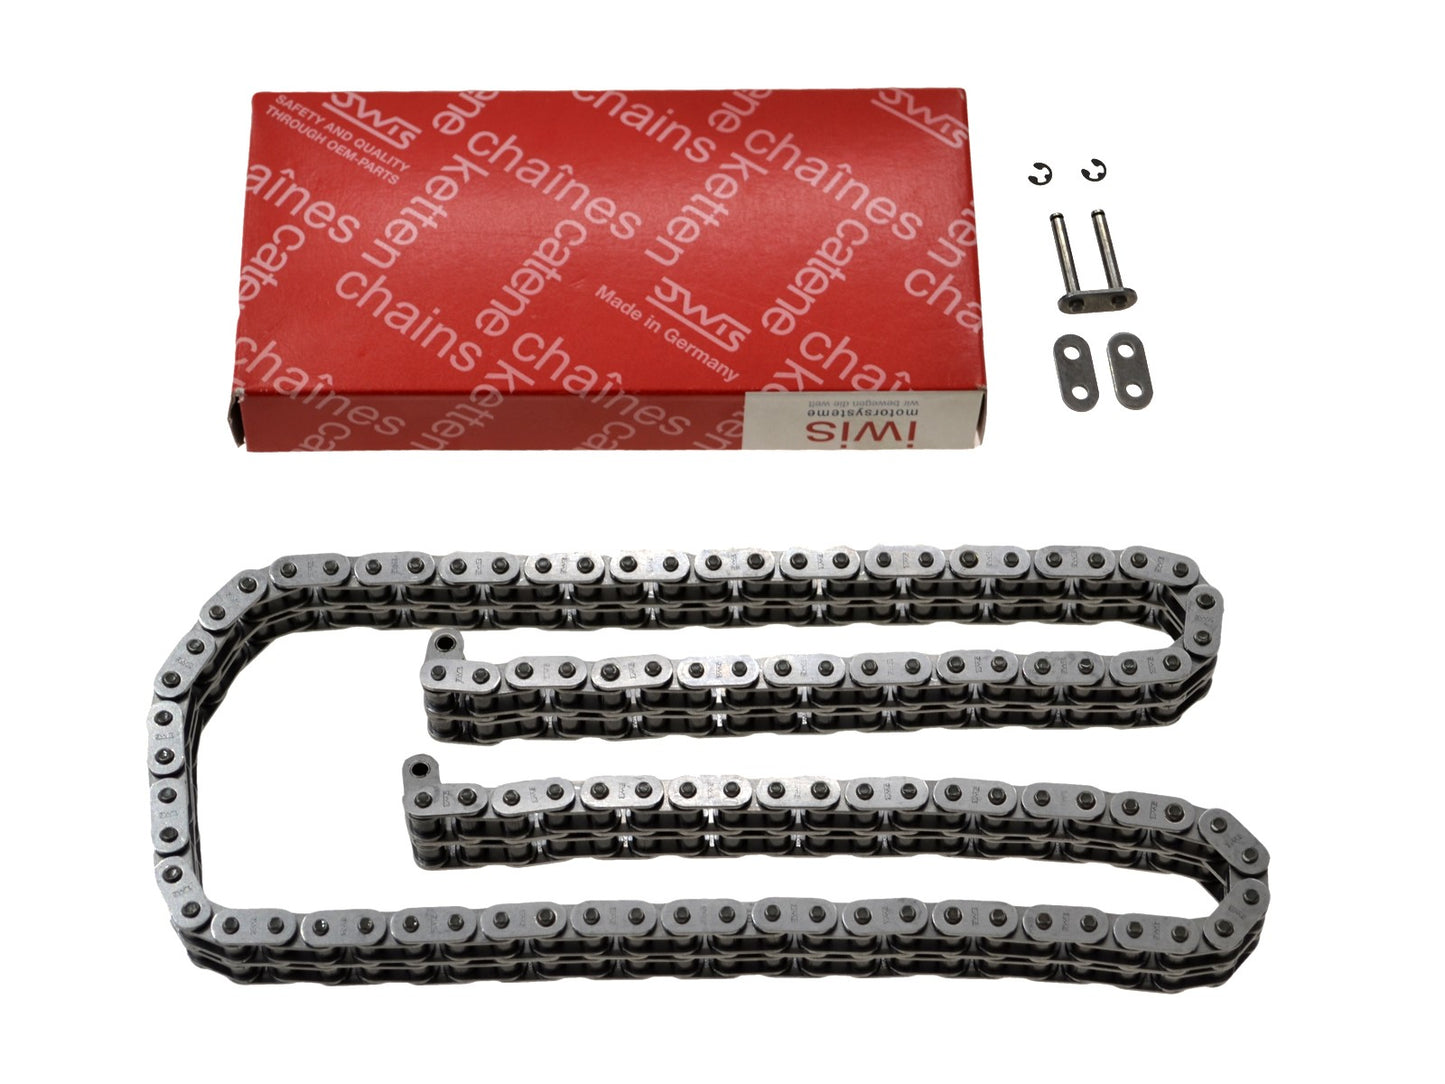 2x timing chains for Porsche 911 F G '65-'89 964 993 engine IWIS DIVIDED